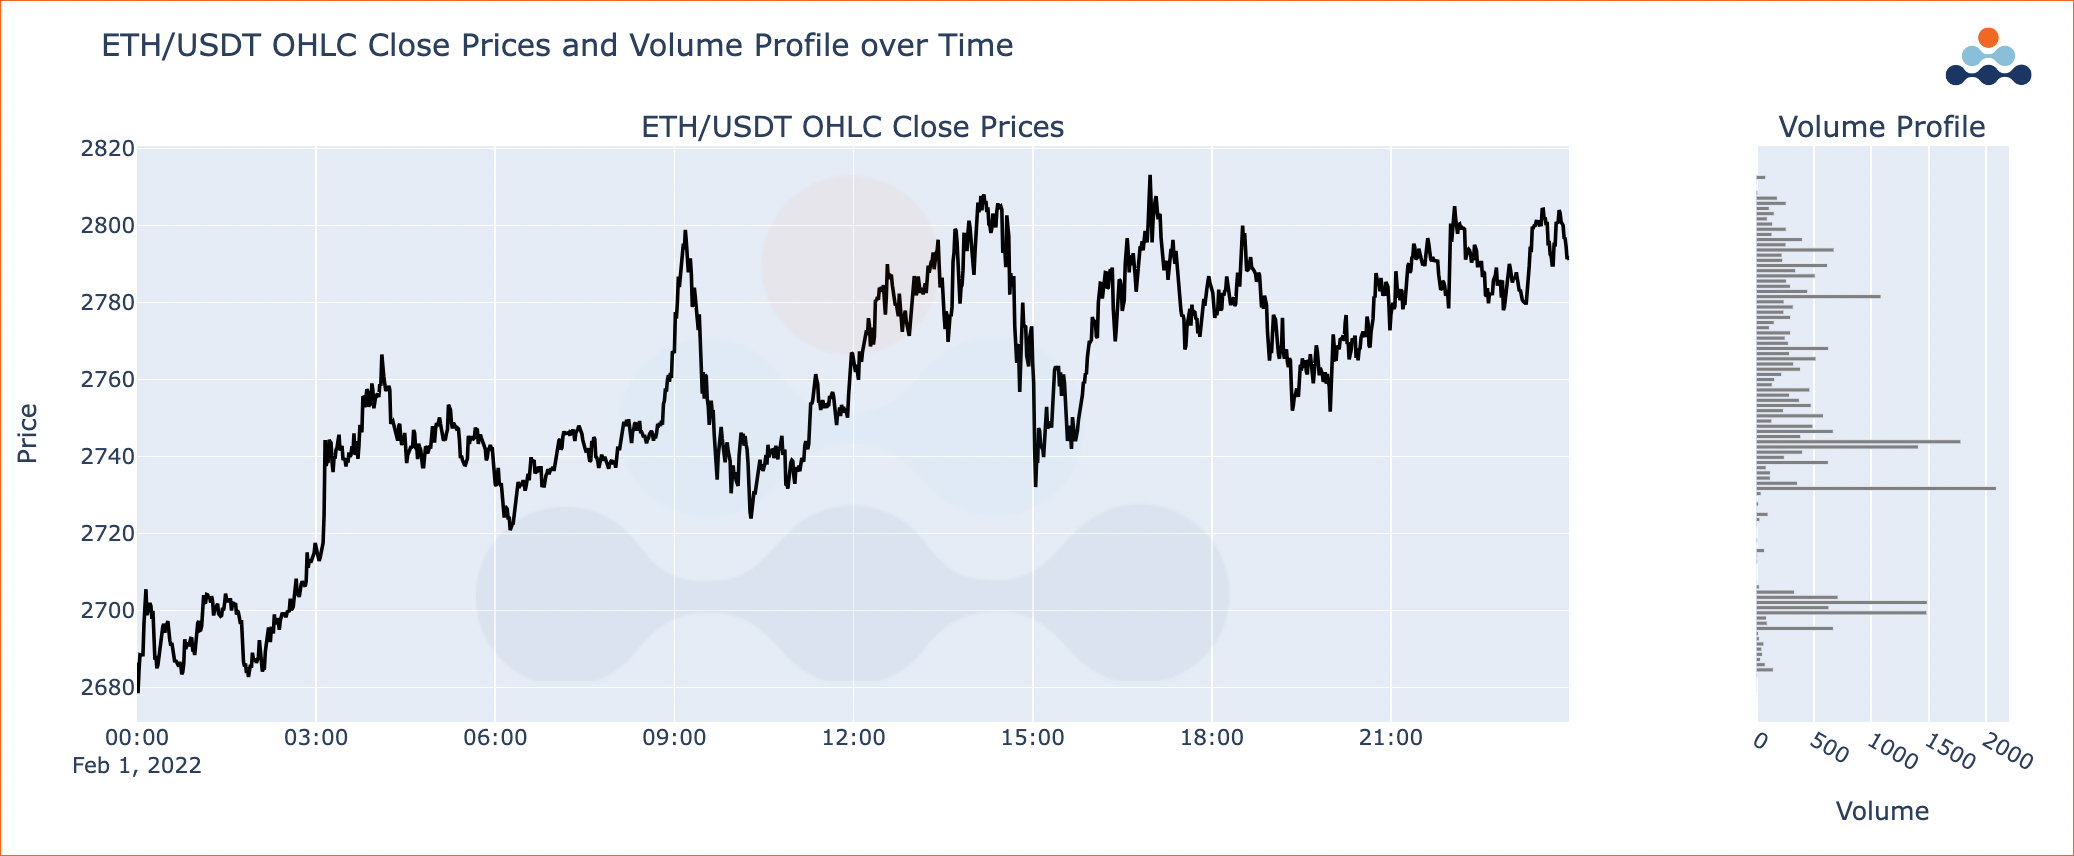 Amberdata ETH/USDT OHLC Close Prices and Volume Profile over Time